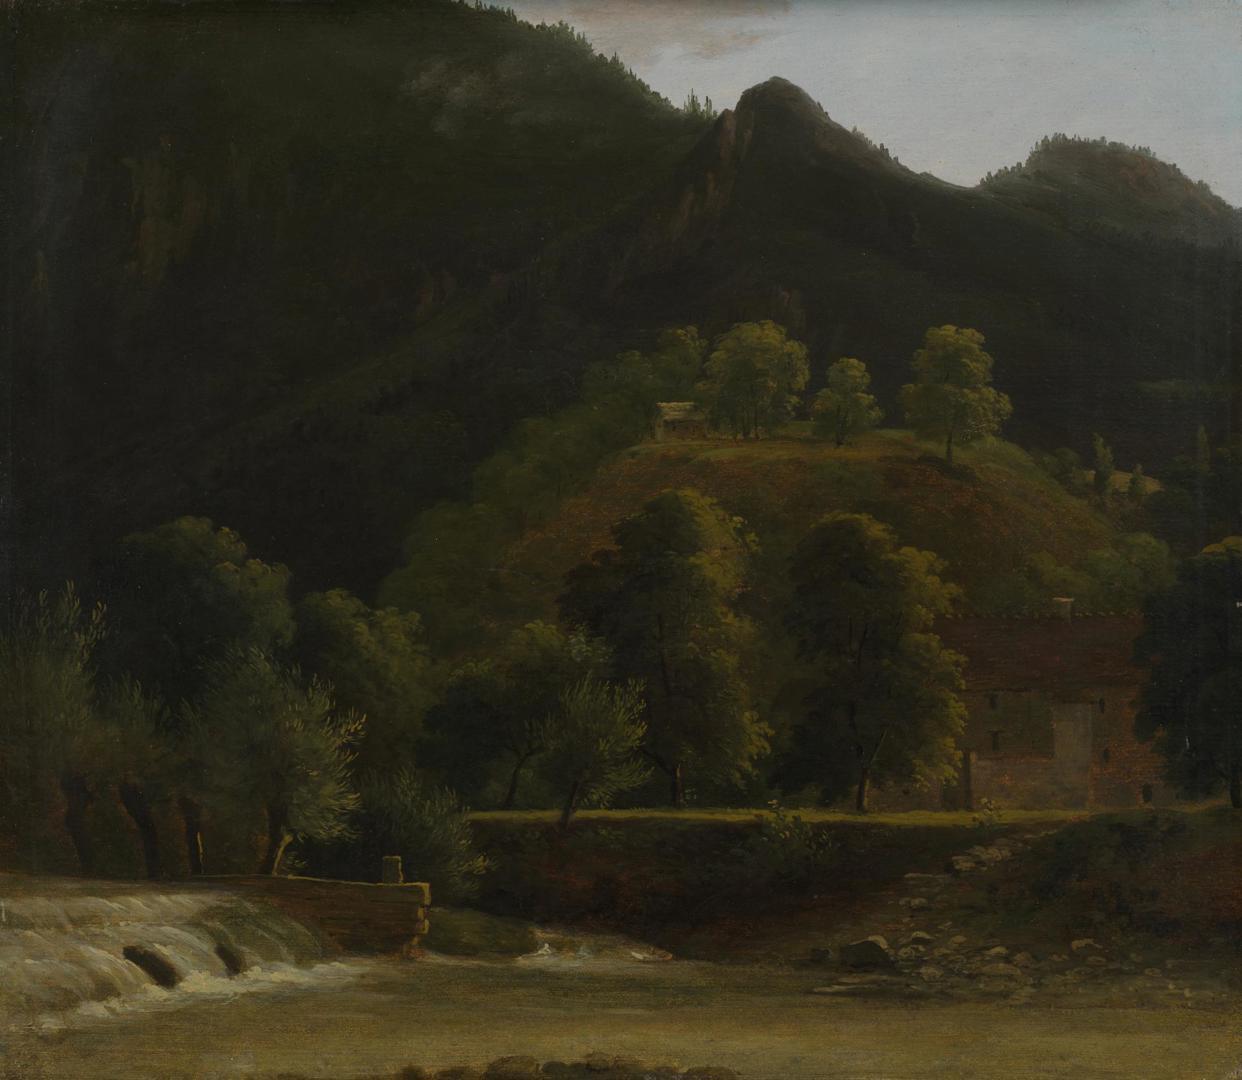 Buildings by a Weir in a Mountainous Valley by Probably by Jean Joseph Xavier Bidauld